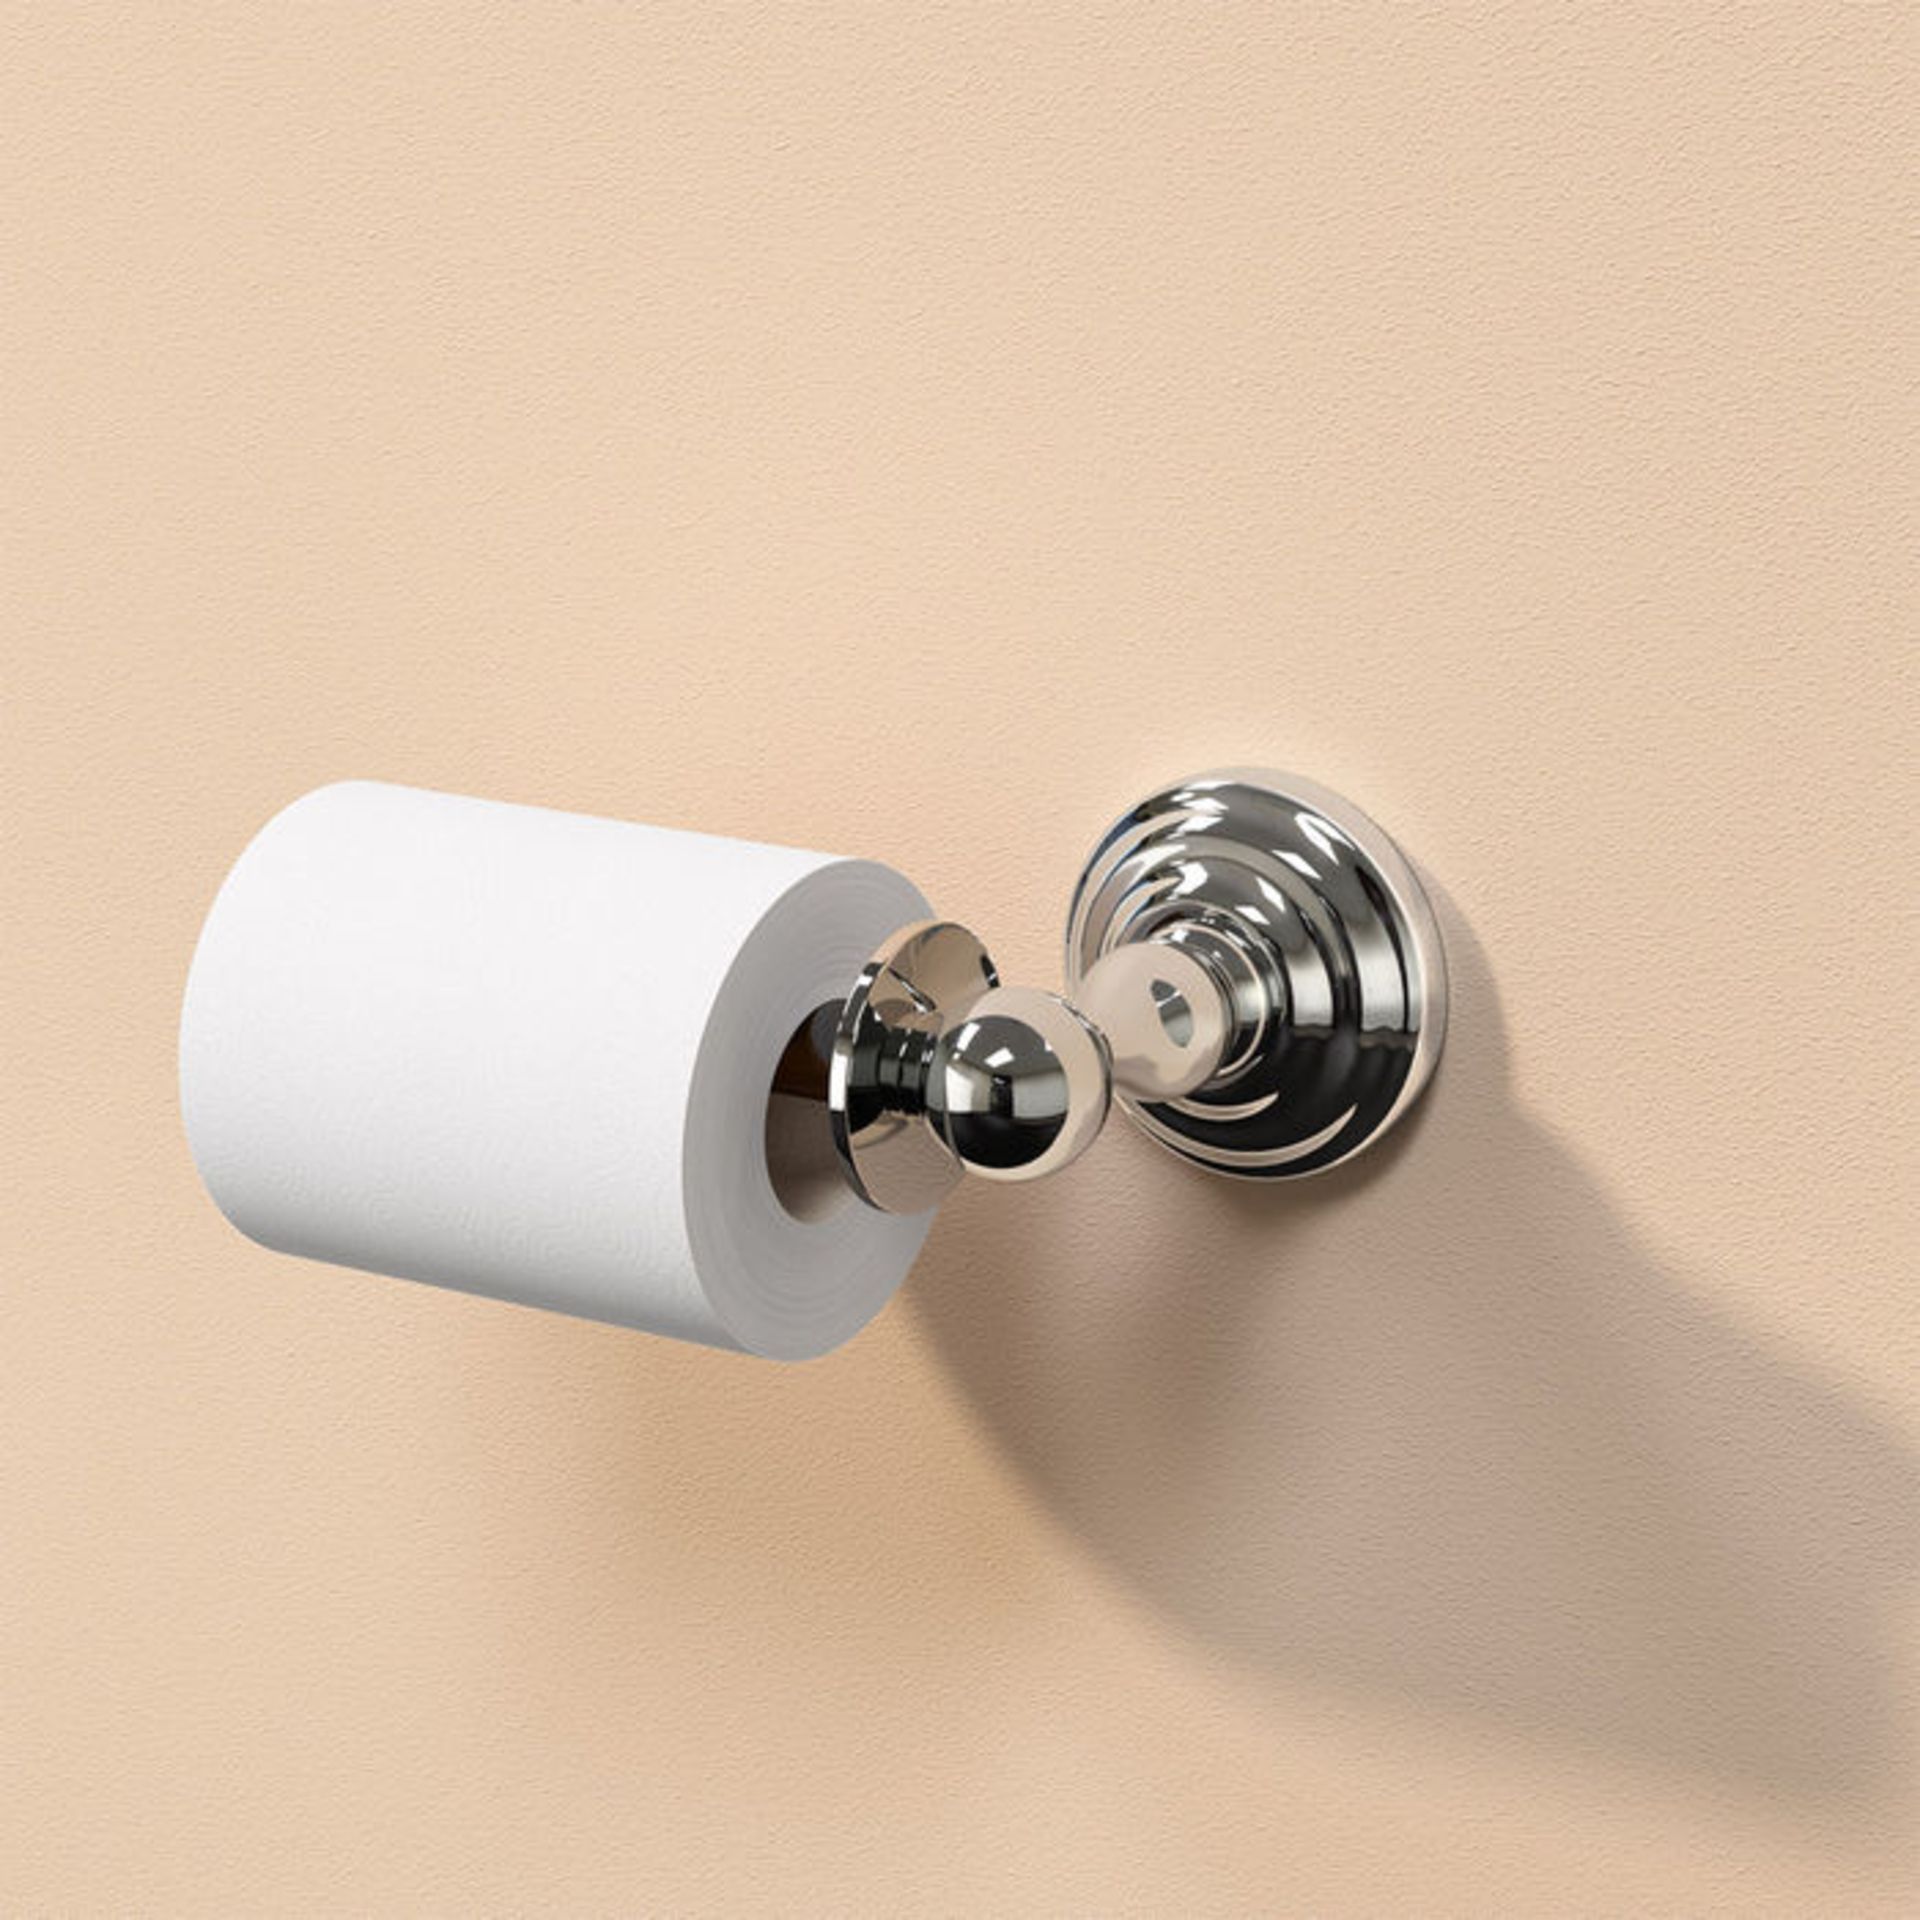 (VZ32) York Toilet Roll Holder Finishes your bathroom with a little extra functionality and style - Image 2 of 3